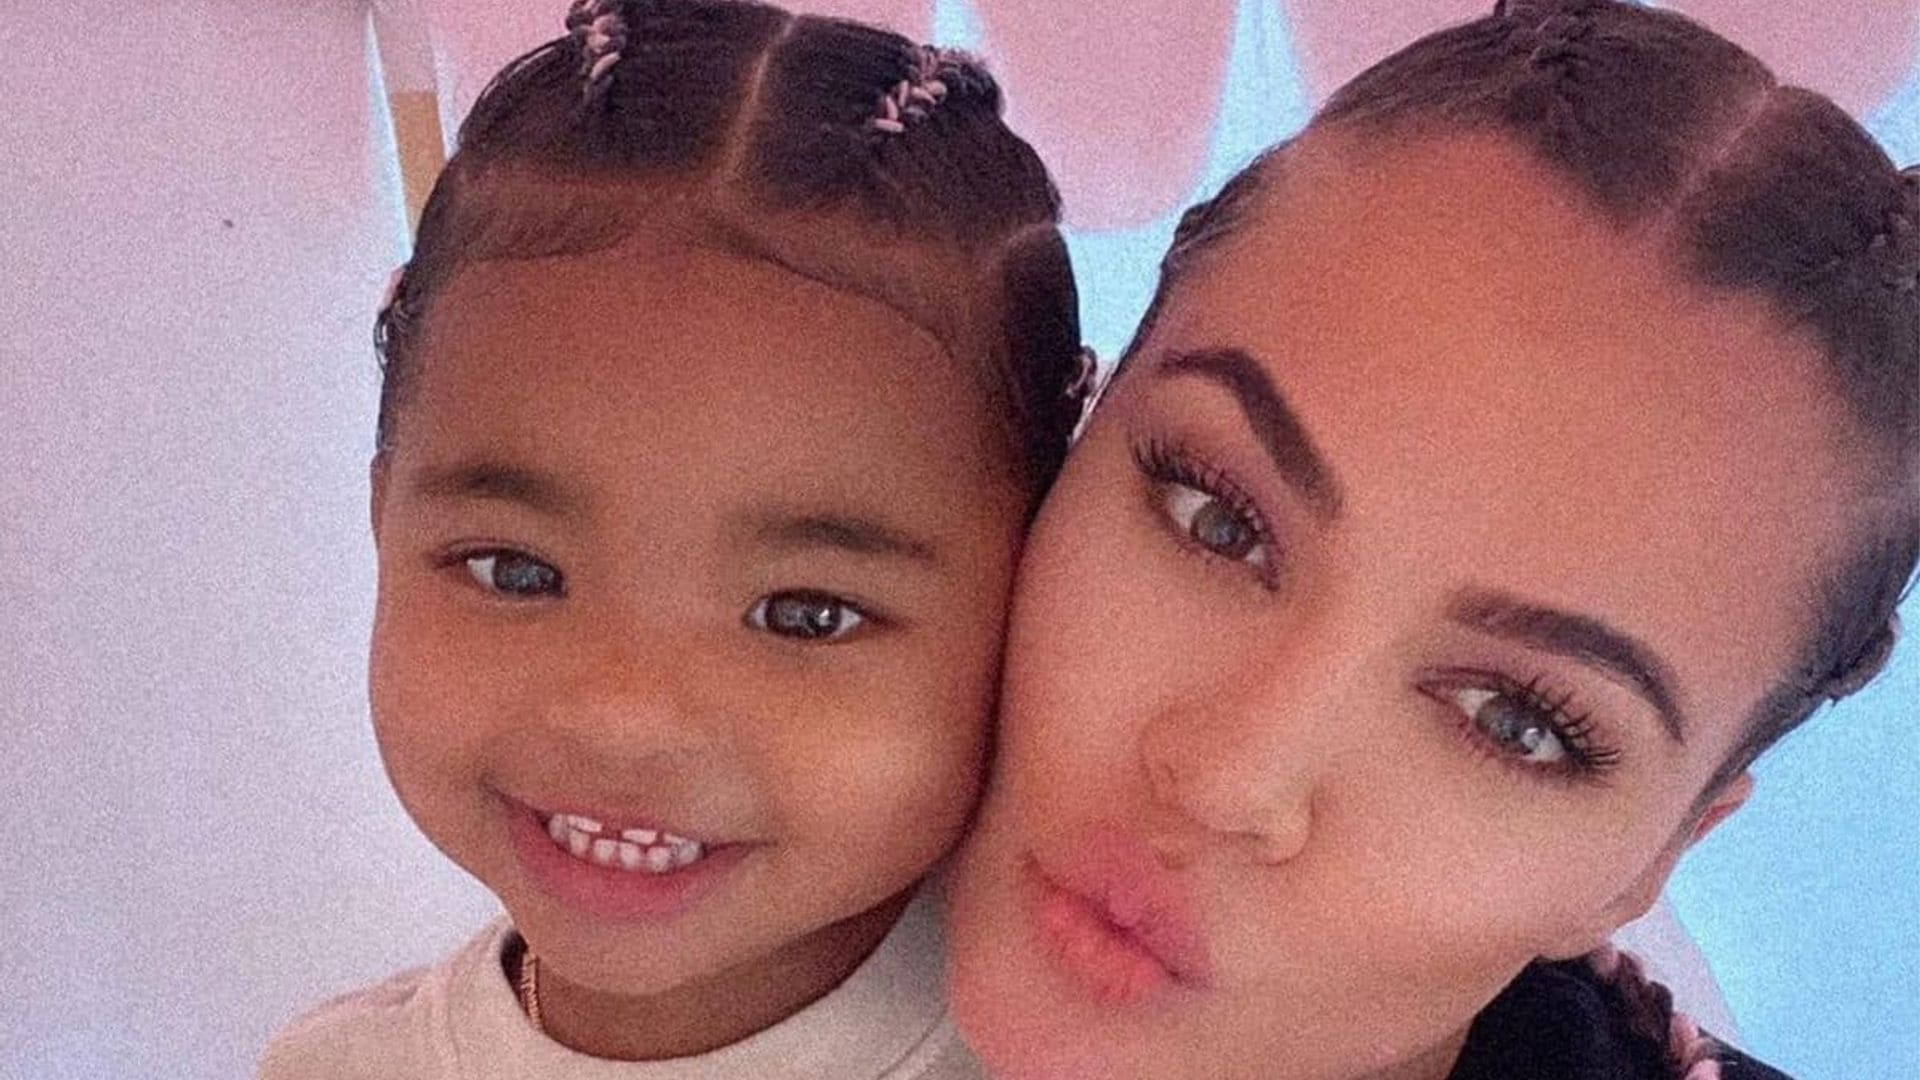 Khloé Kardashian and baby True looked adorable in their matching reindeer pajamas